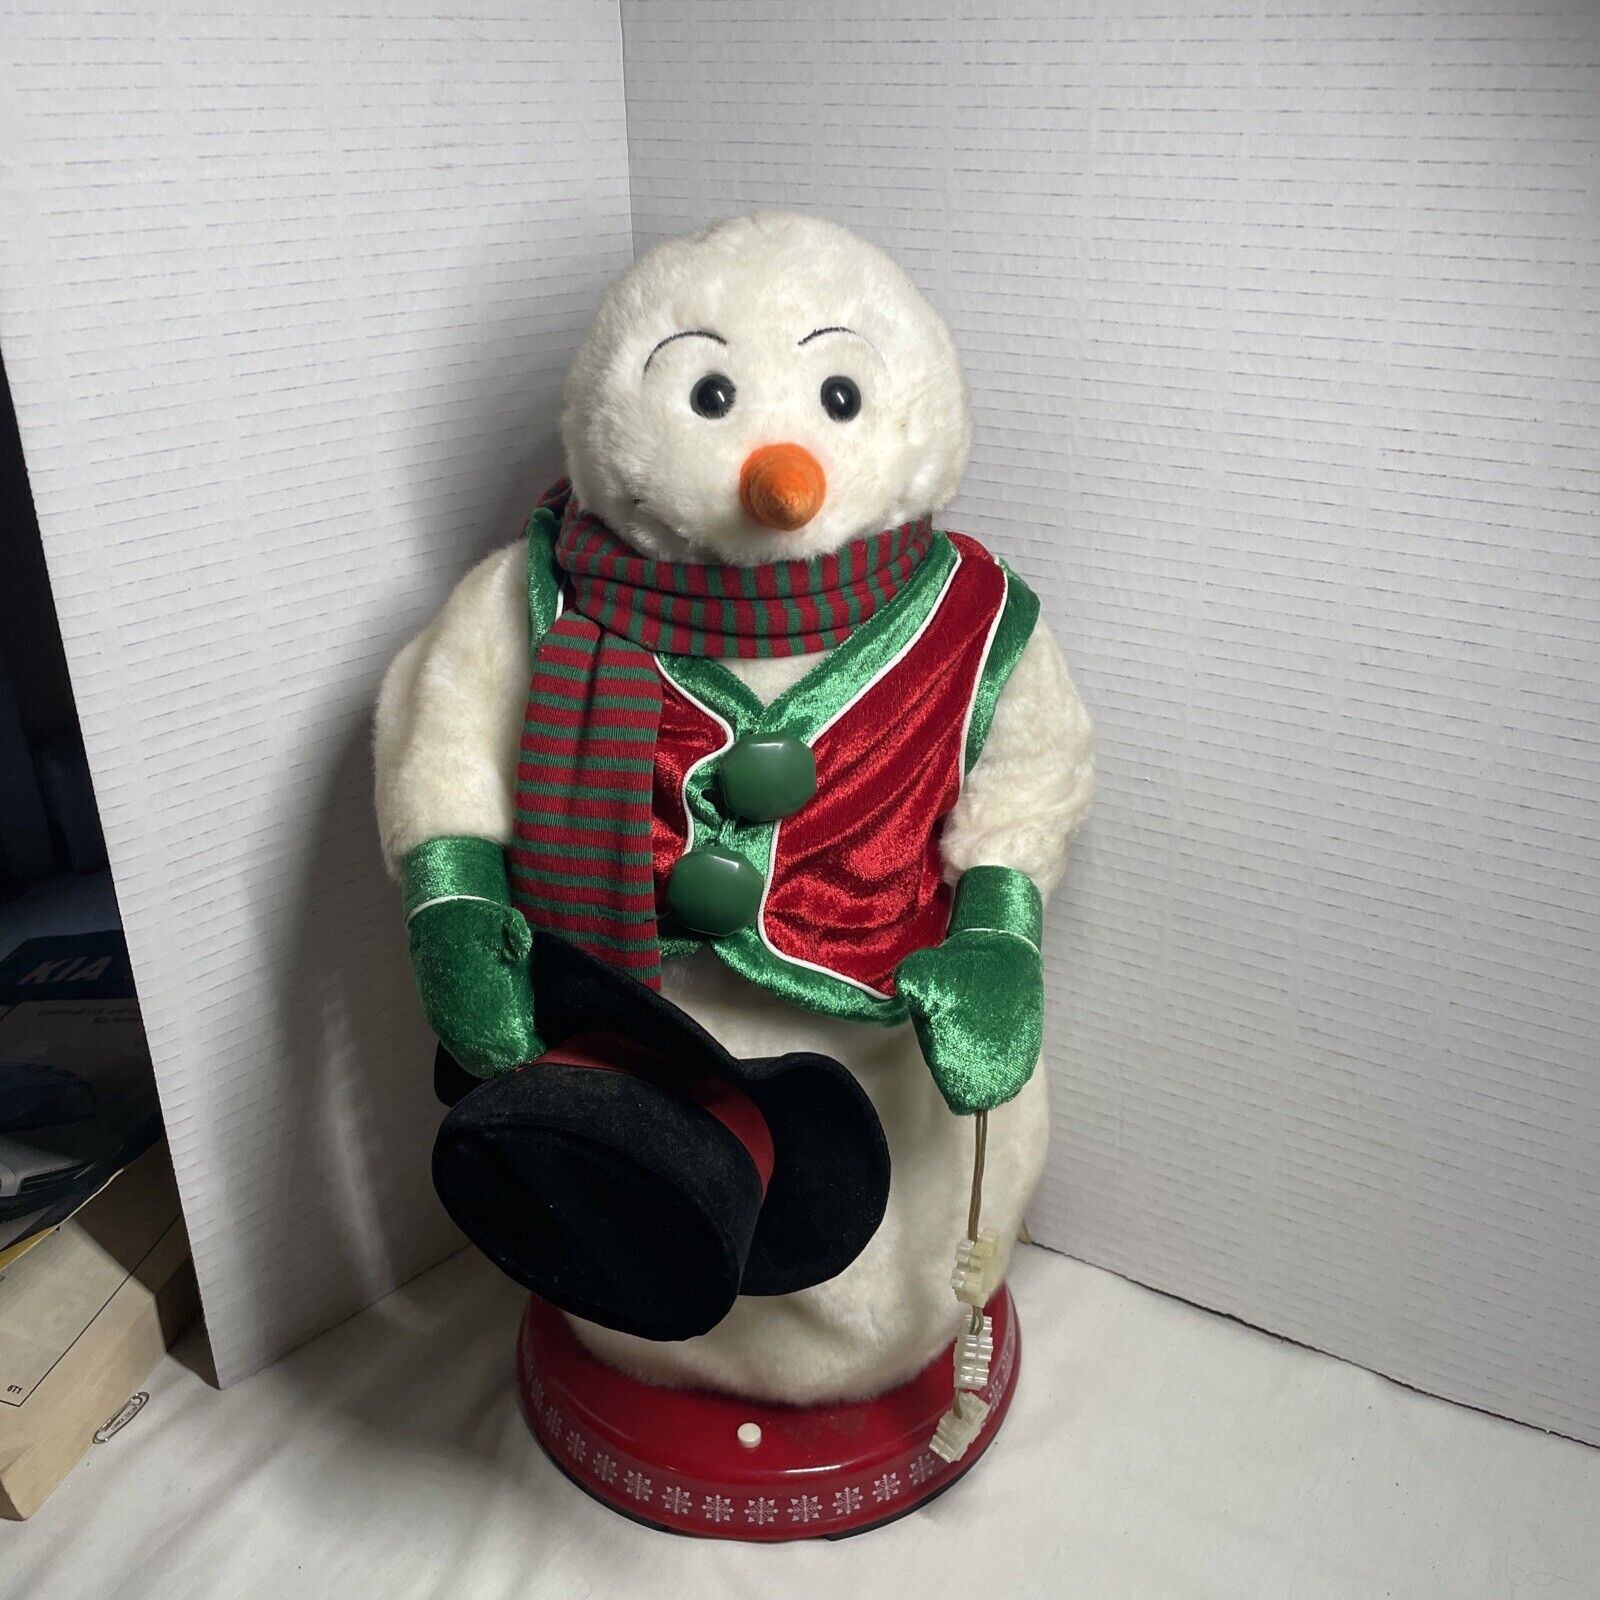 Gemmy Snowflake Spinning Snowman Animated Musical Dancing 'Snow Miser' WORKS